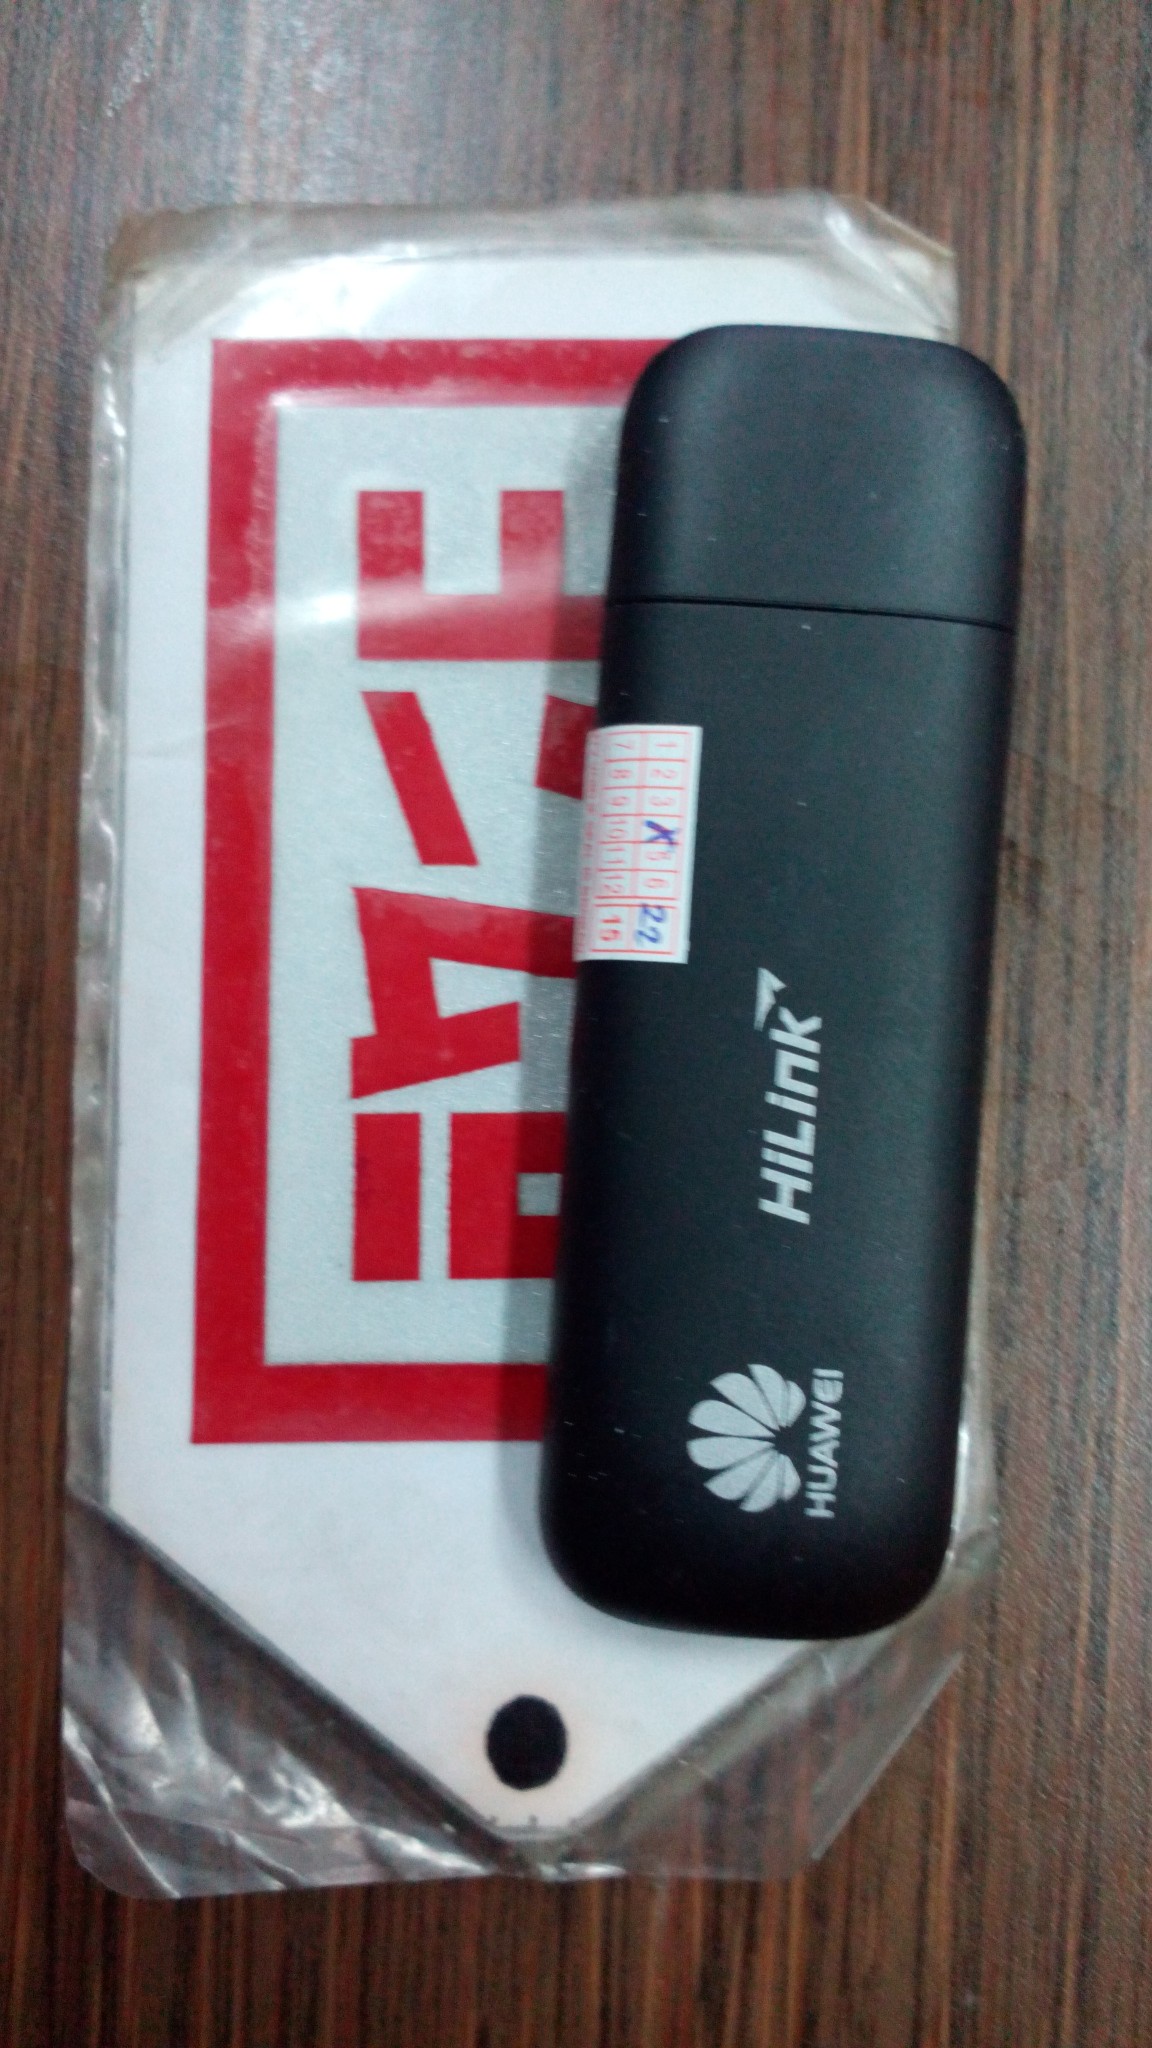 Huawei E3231 Drivers For Dongle Software